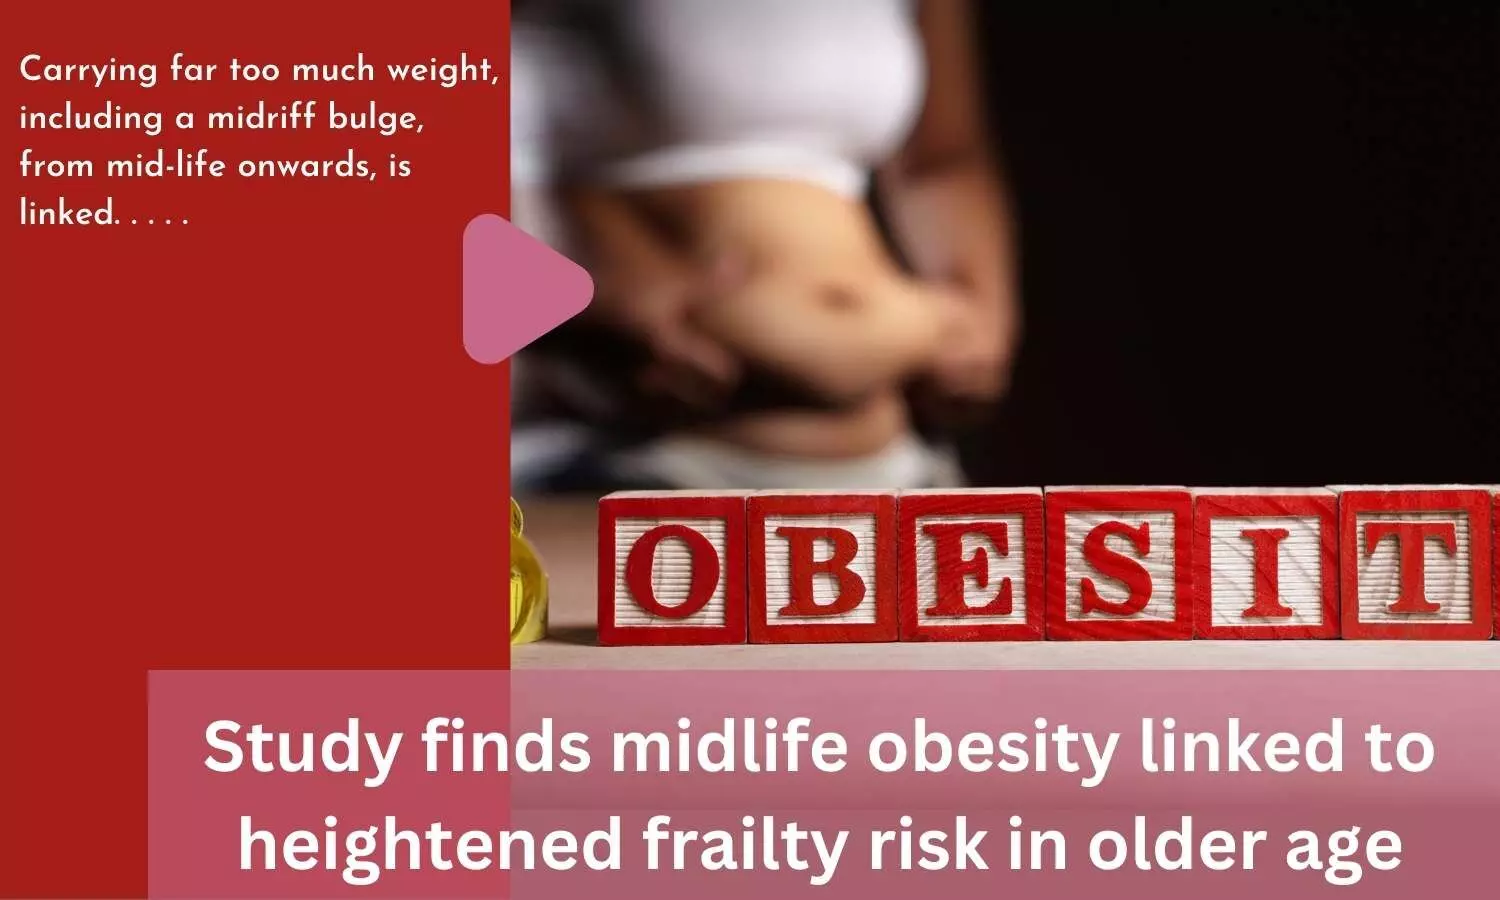 Study finds midlife obesity linked to heightened frailty risk in older age